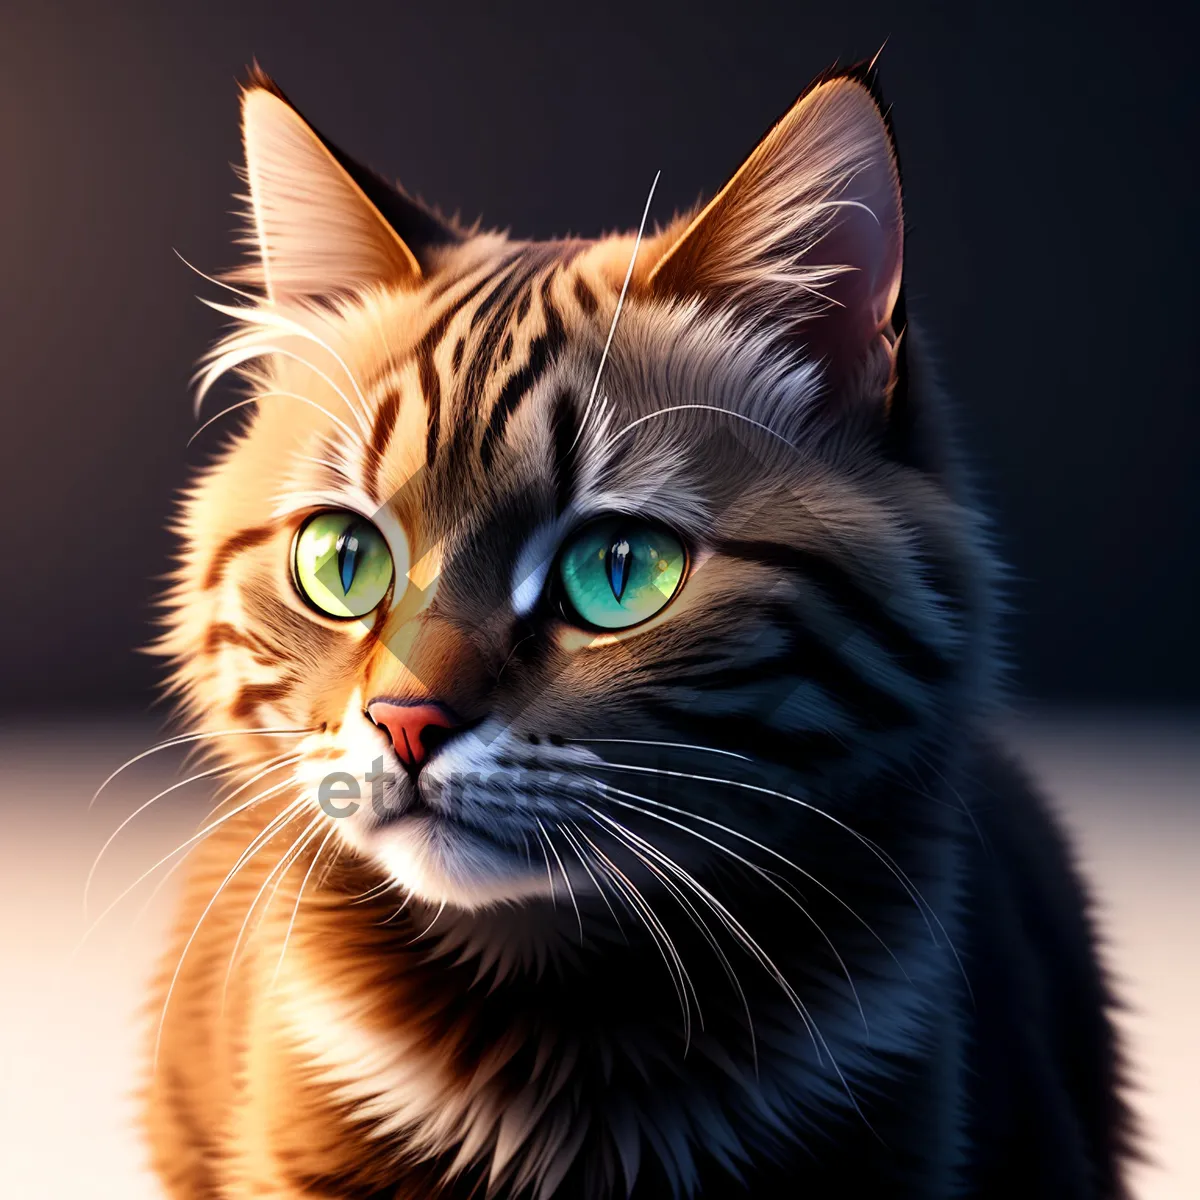 Picture of Furry-Cute Cat with Whiskers and Adorable Eyes